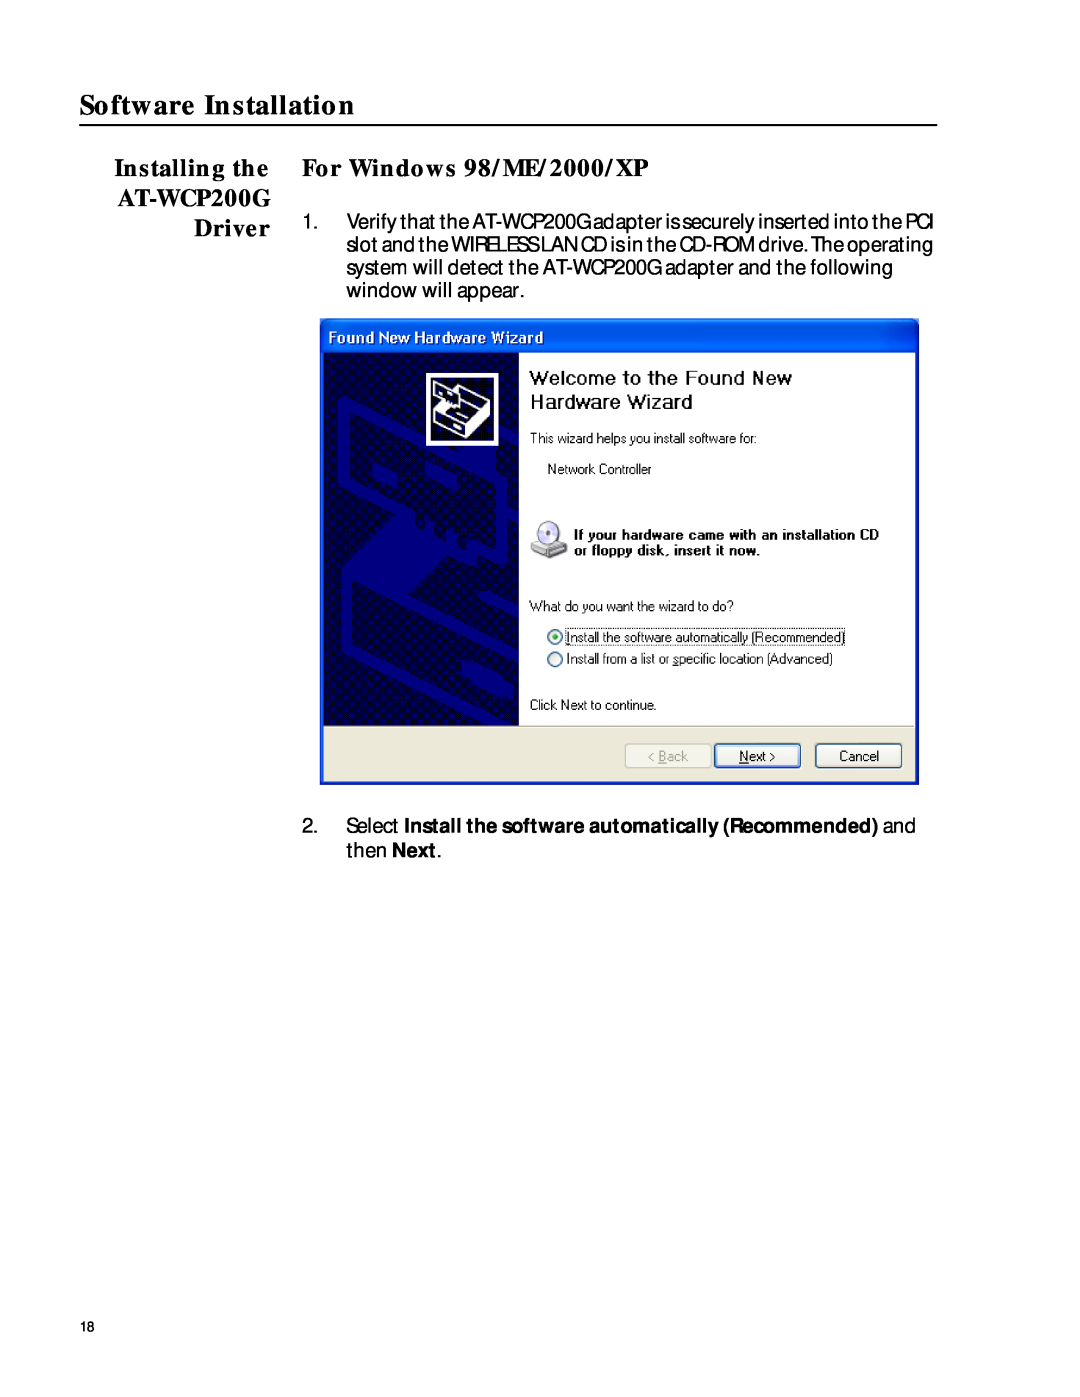 Allied Telesis manual Software Installation, Installing the AT-WCP200G Driver, For Windows 98/ME/2000/XP 